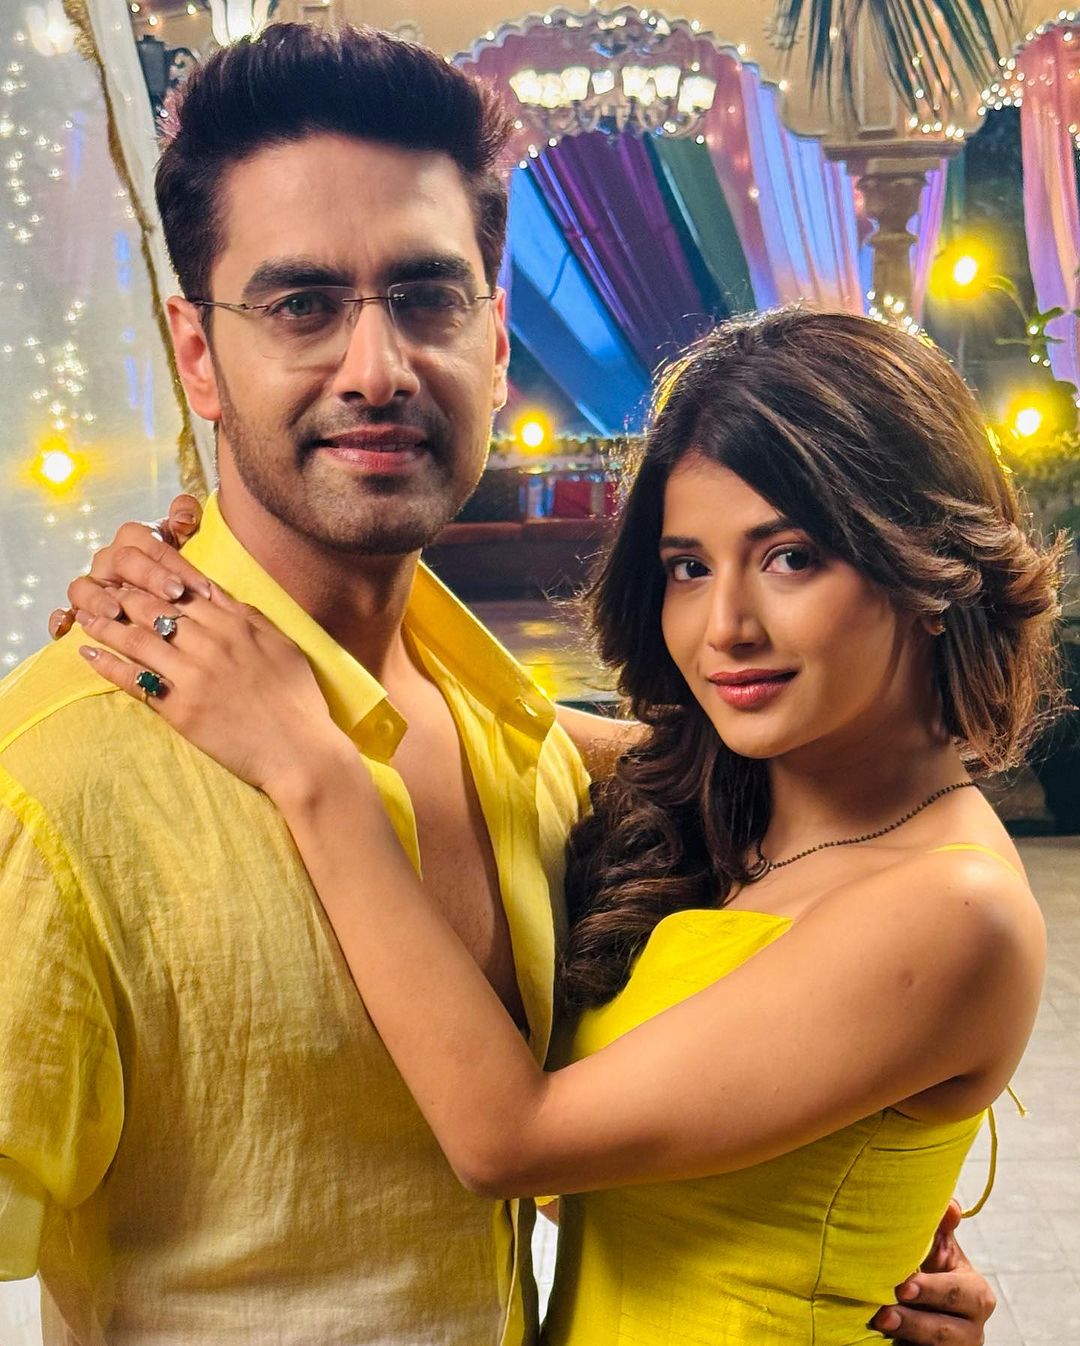 Yeh Rishta Kya Kehlata Hai Exclusive Update: Are Armaan and Abhira Getting Married? With Nail biting twists and turns the upcoming episodes are going to air;